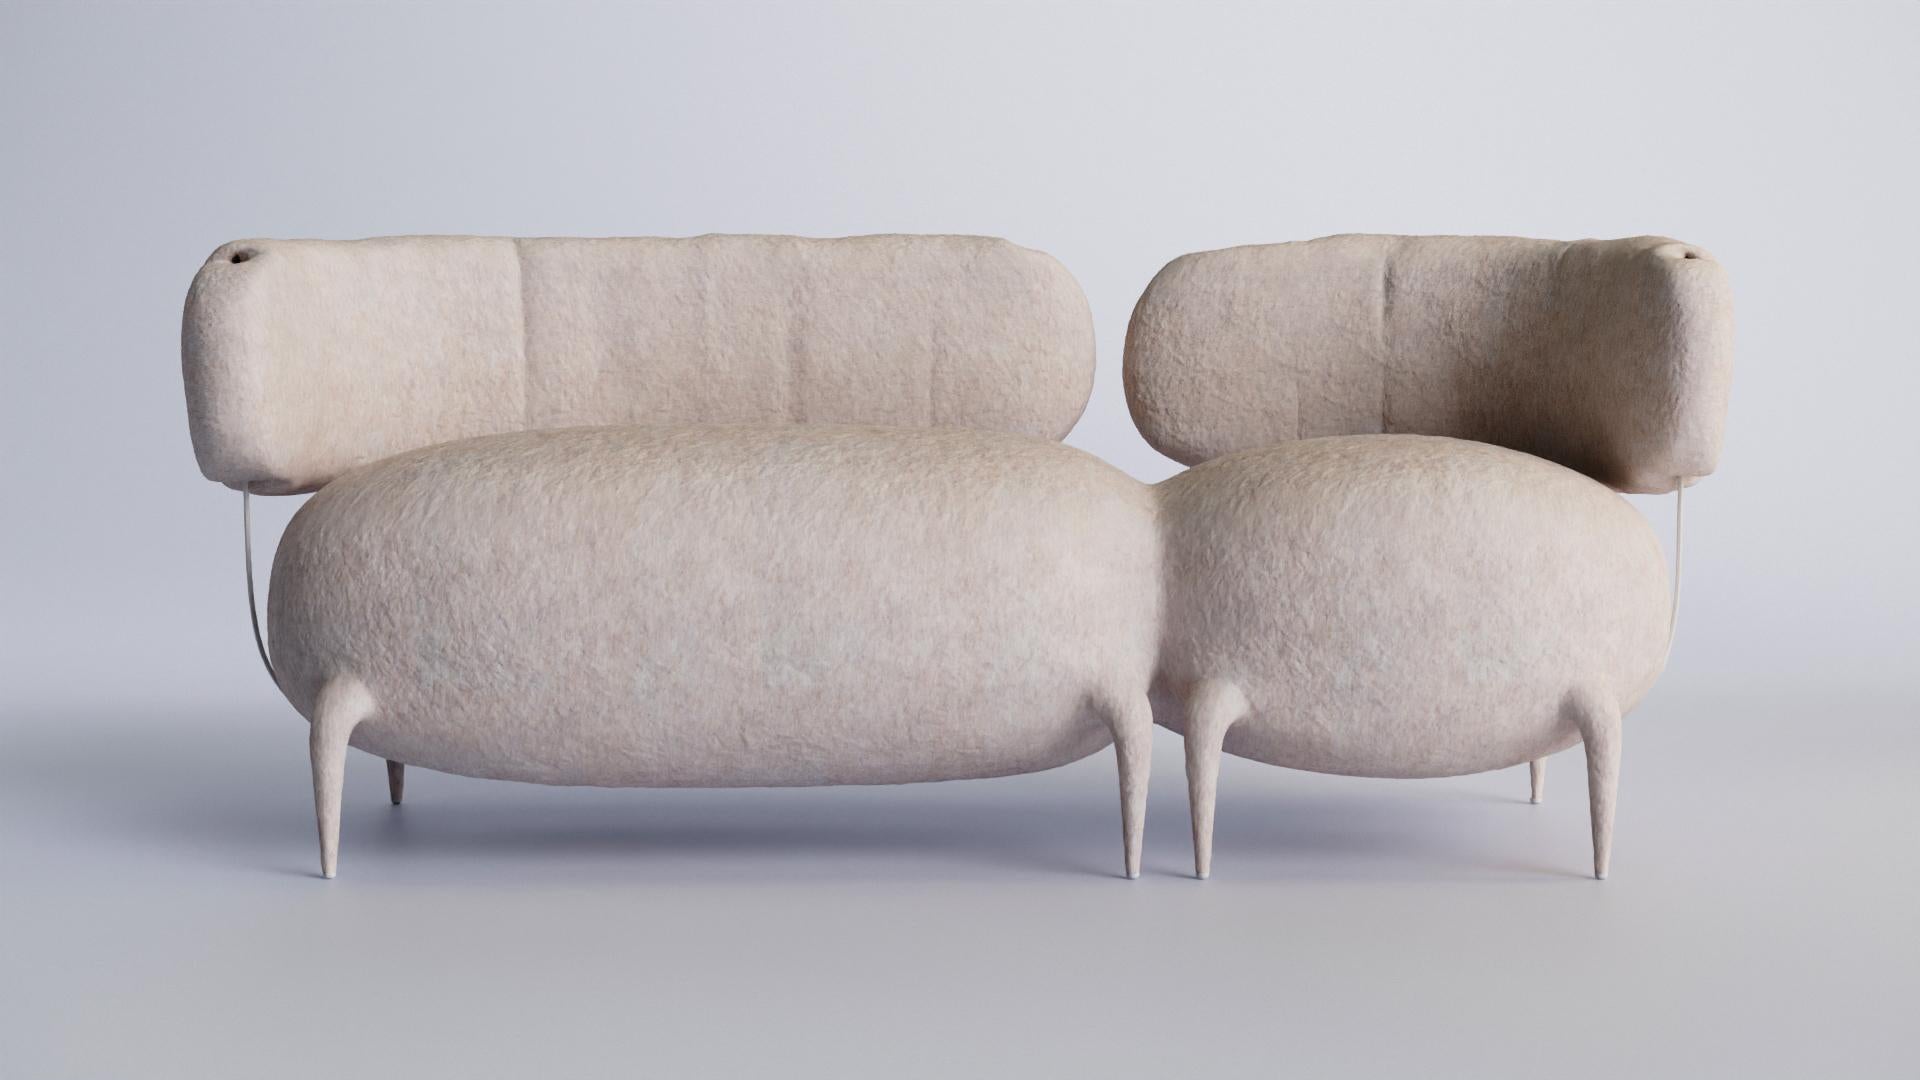 Lymphosofa Sofa by Taras Yoom
Limited Edition of 10
Dimensions: D 82 x W 200 x H 82 cm
Materials: Wood, metal, felt, PU.
Available in two upholstery options: Unique felt made by hand using stiff wool fibers, or fabric lining.

Lymphosofa is included